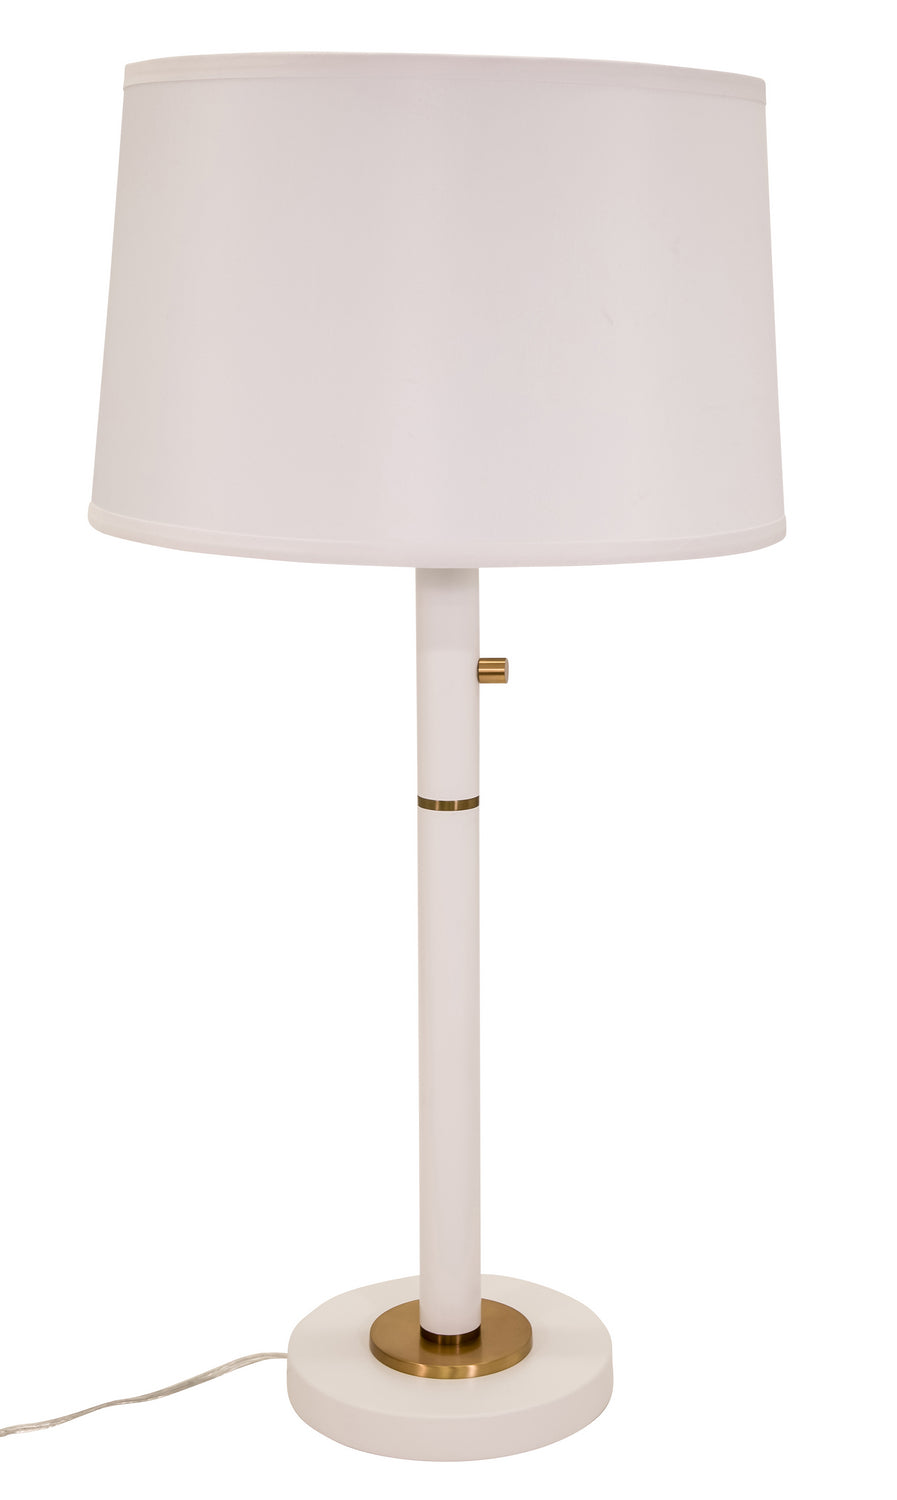 House of Troy - RU750-WT - Three Light Table Lamp - Rupert - White With Weathered Brass Accents